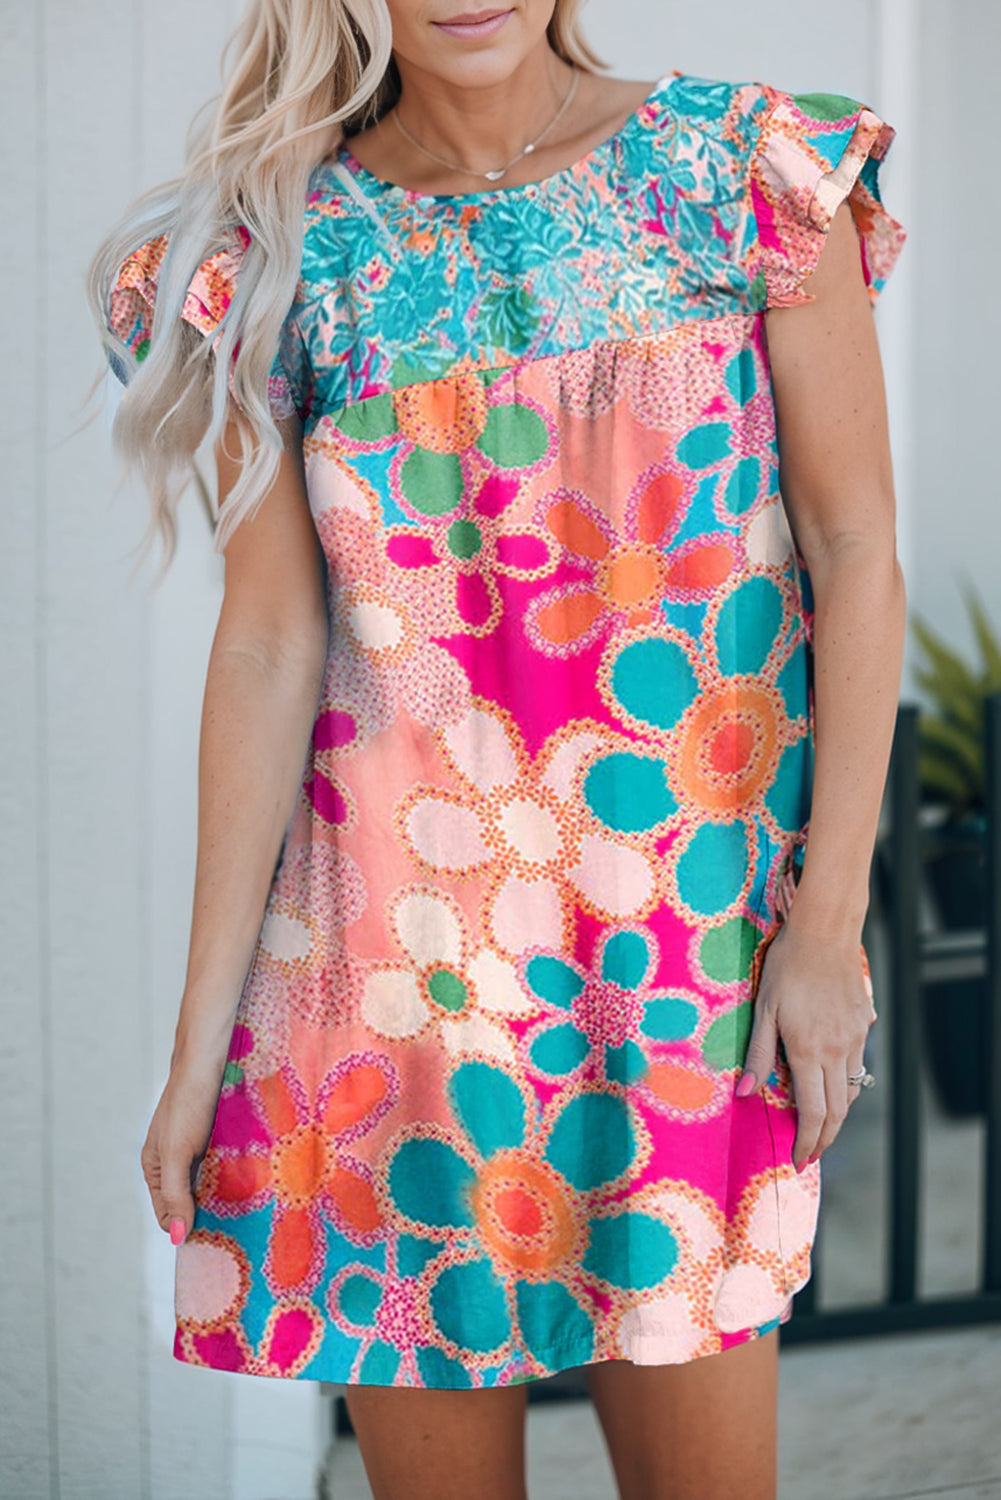 Chic Floral Dress for Summer Soirees: Round Neck Flutter Sleeve